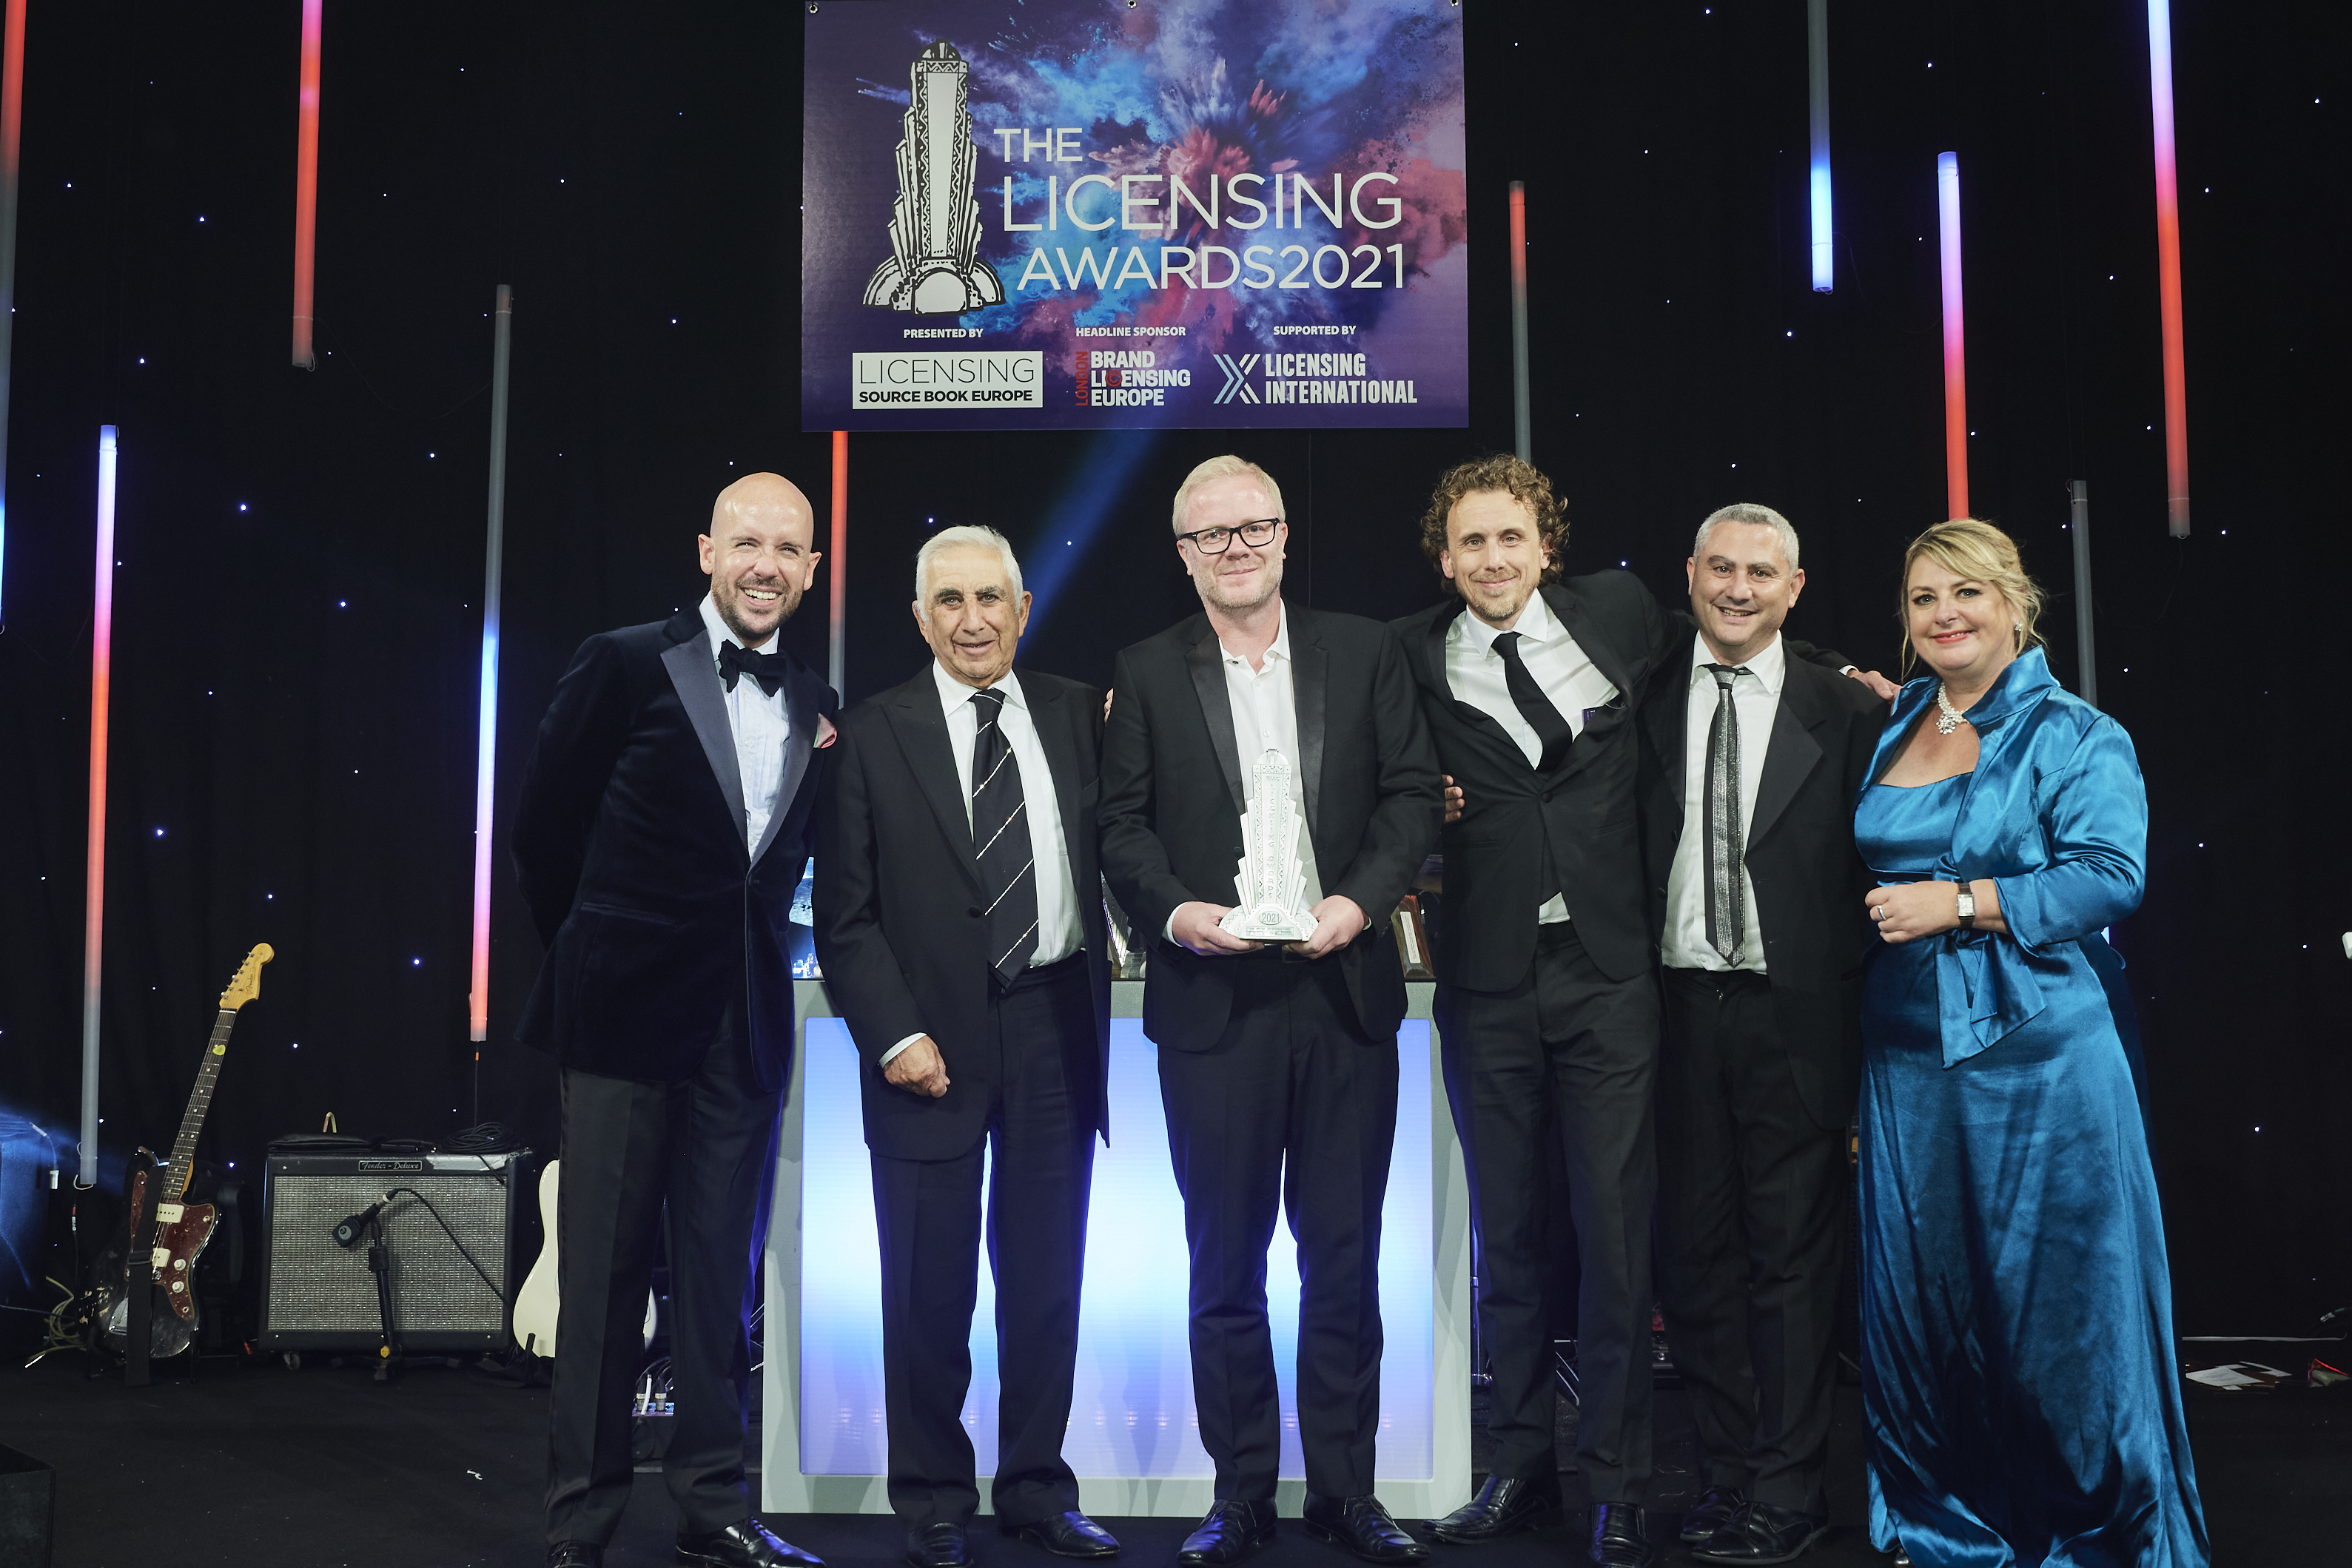 Above: (left-right) Tom Allen (host of the event) with Danilo’s Laurence Prince, Martin Carter, Dan Grant and Daniel Prince with Jakki Brown of Max Publishing, which owns and organises The Licensing Awards.